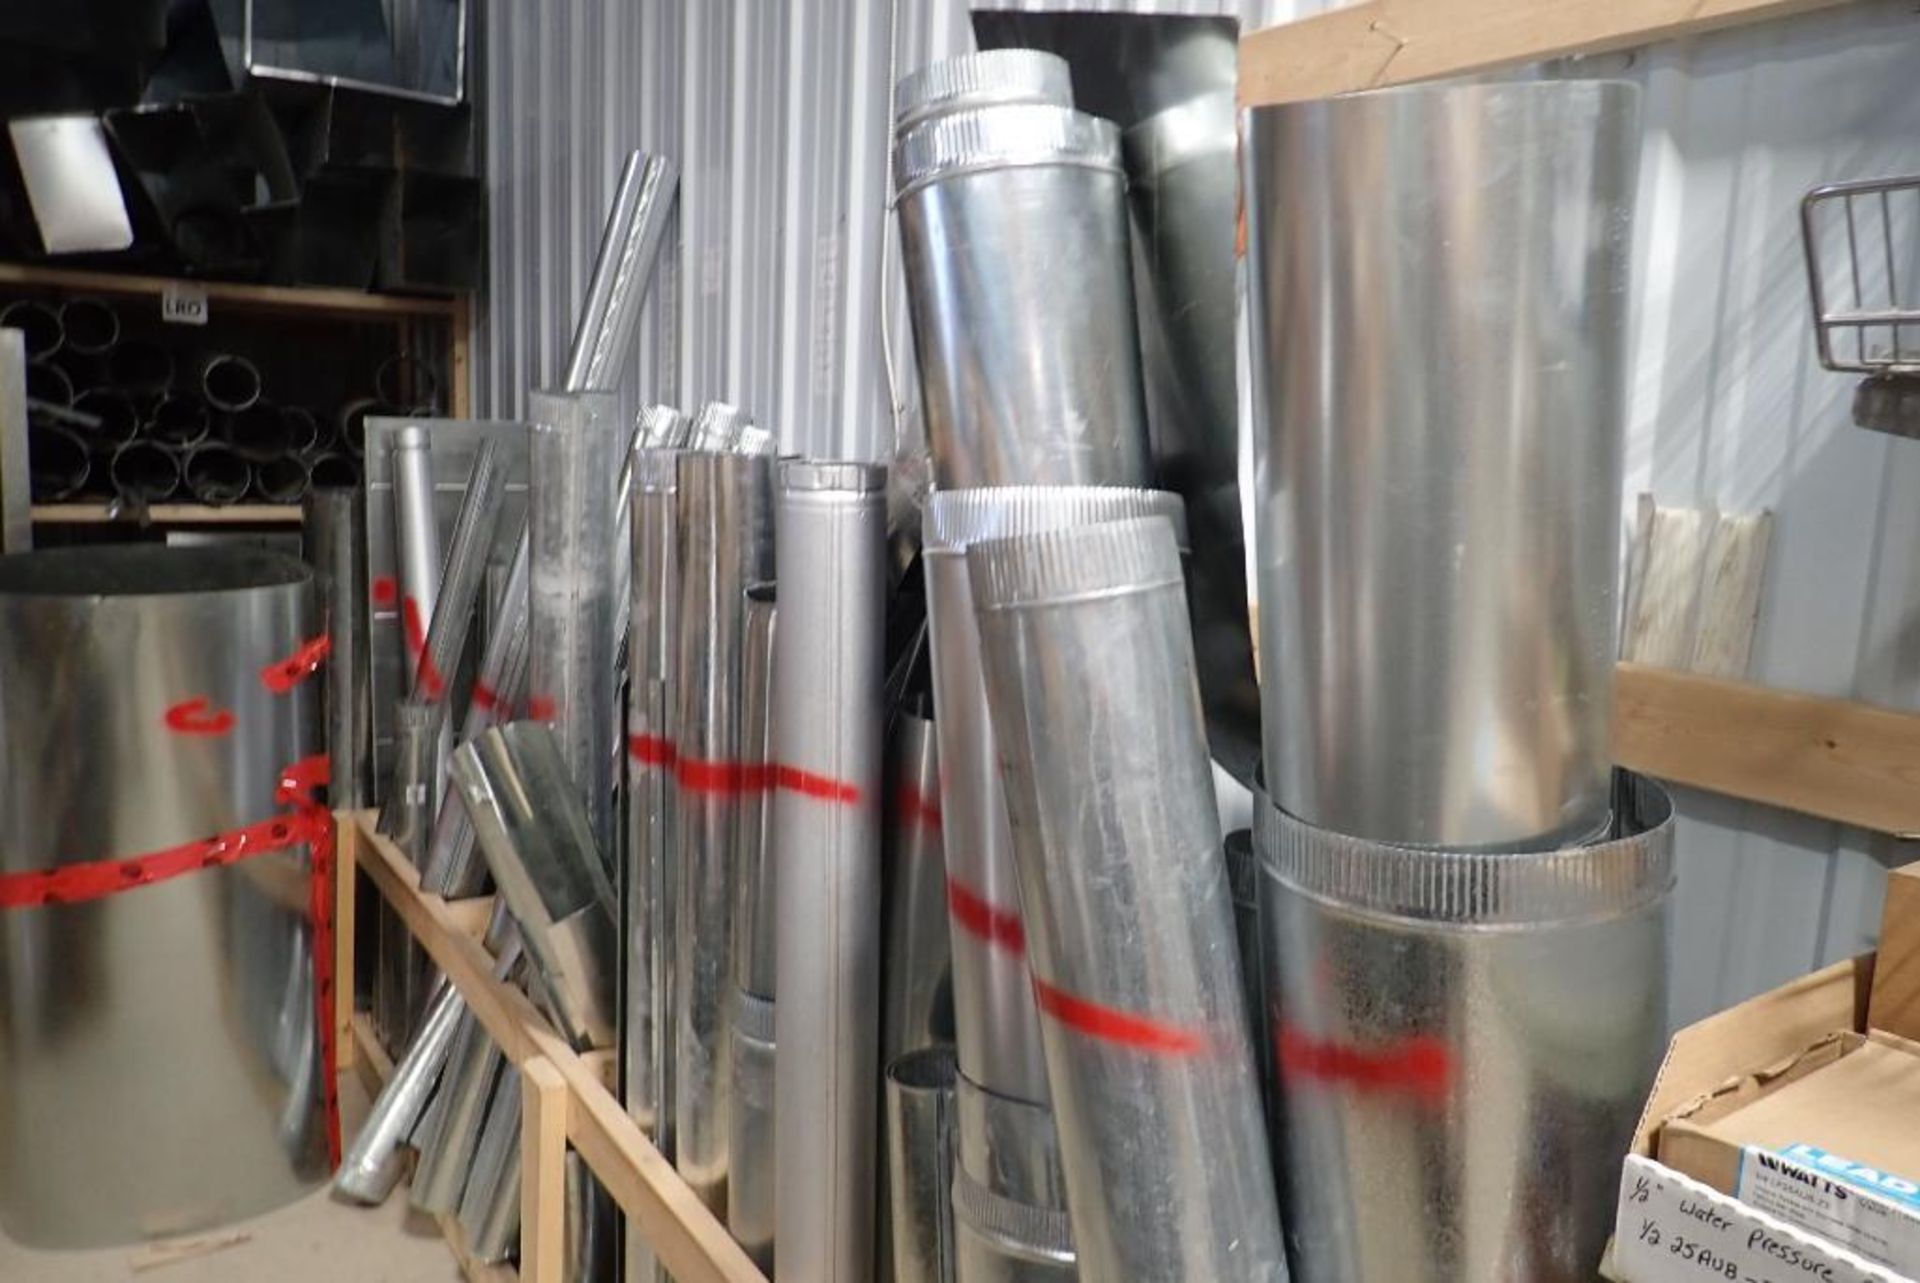 Contents of Pallet Racking inc. Ducting, Raw Tin, Furnace Fittings, etc. - Image 12 of 13